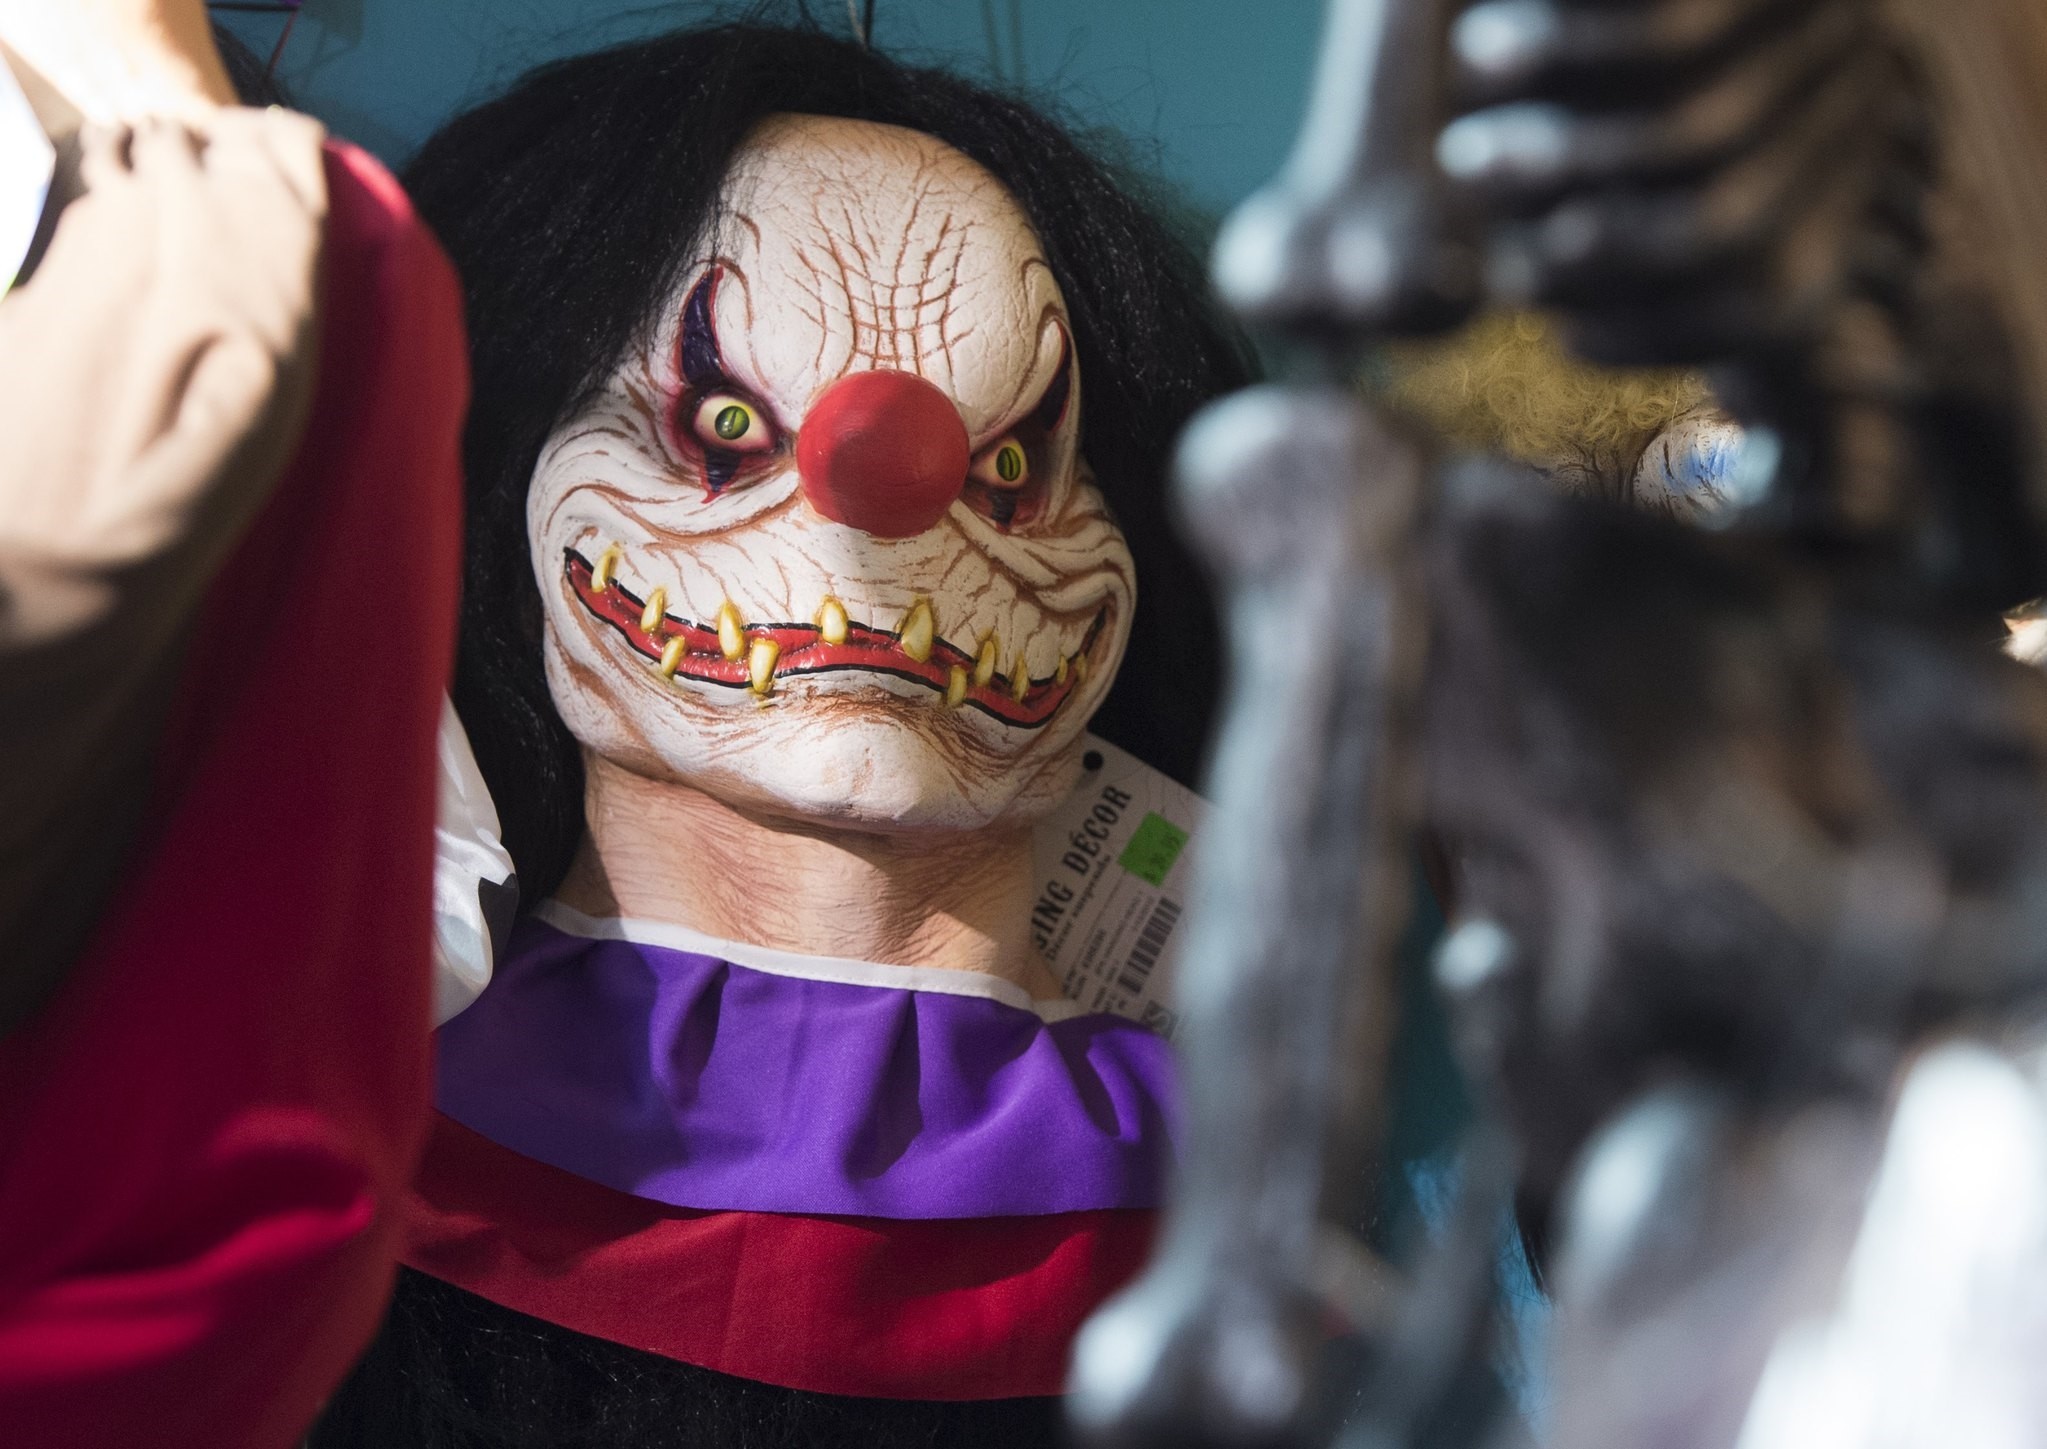 Halloween costumes and props, including a ,scary, clown mask, are seen for sale at Total Party, a party store, in Arlington, Virginia, October 7, 2016. (AFP Photo)